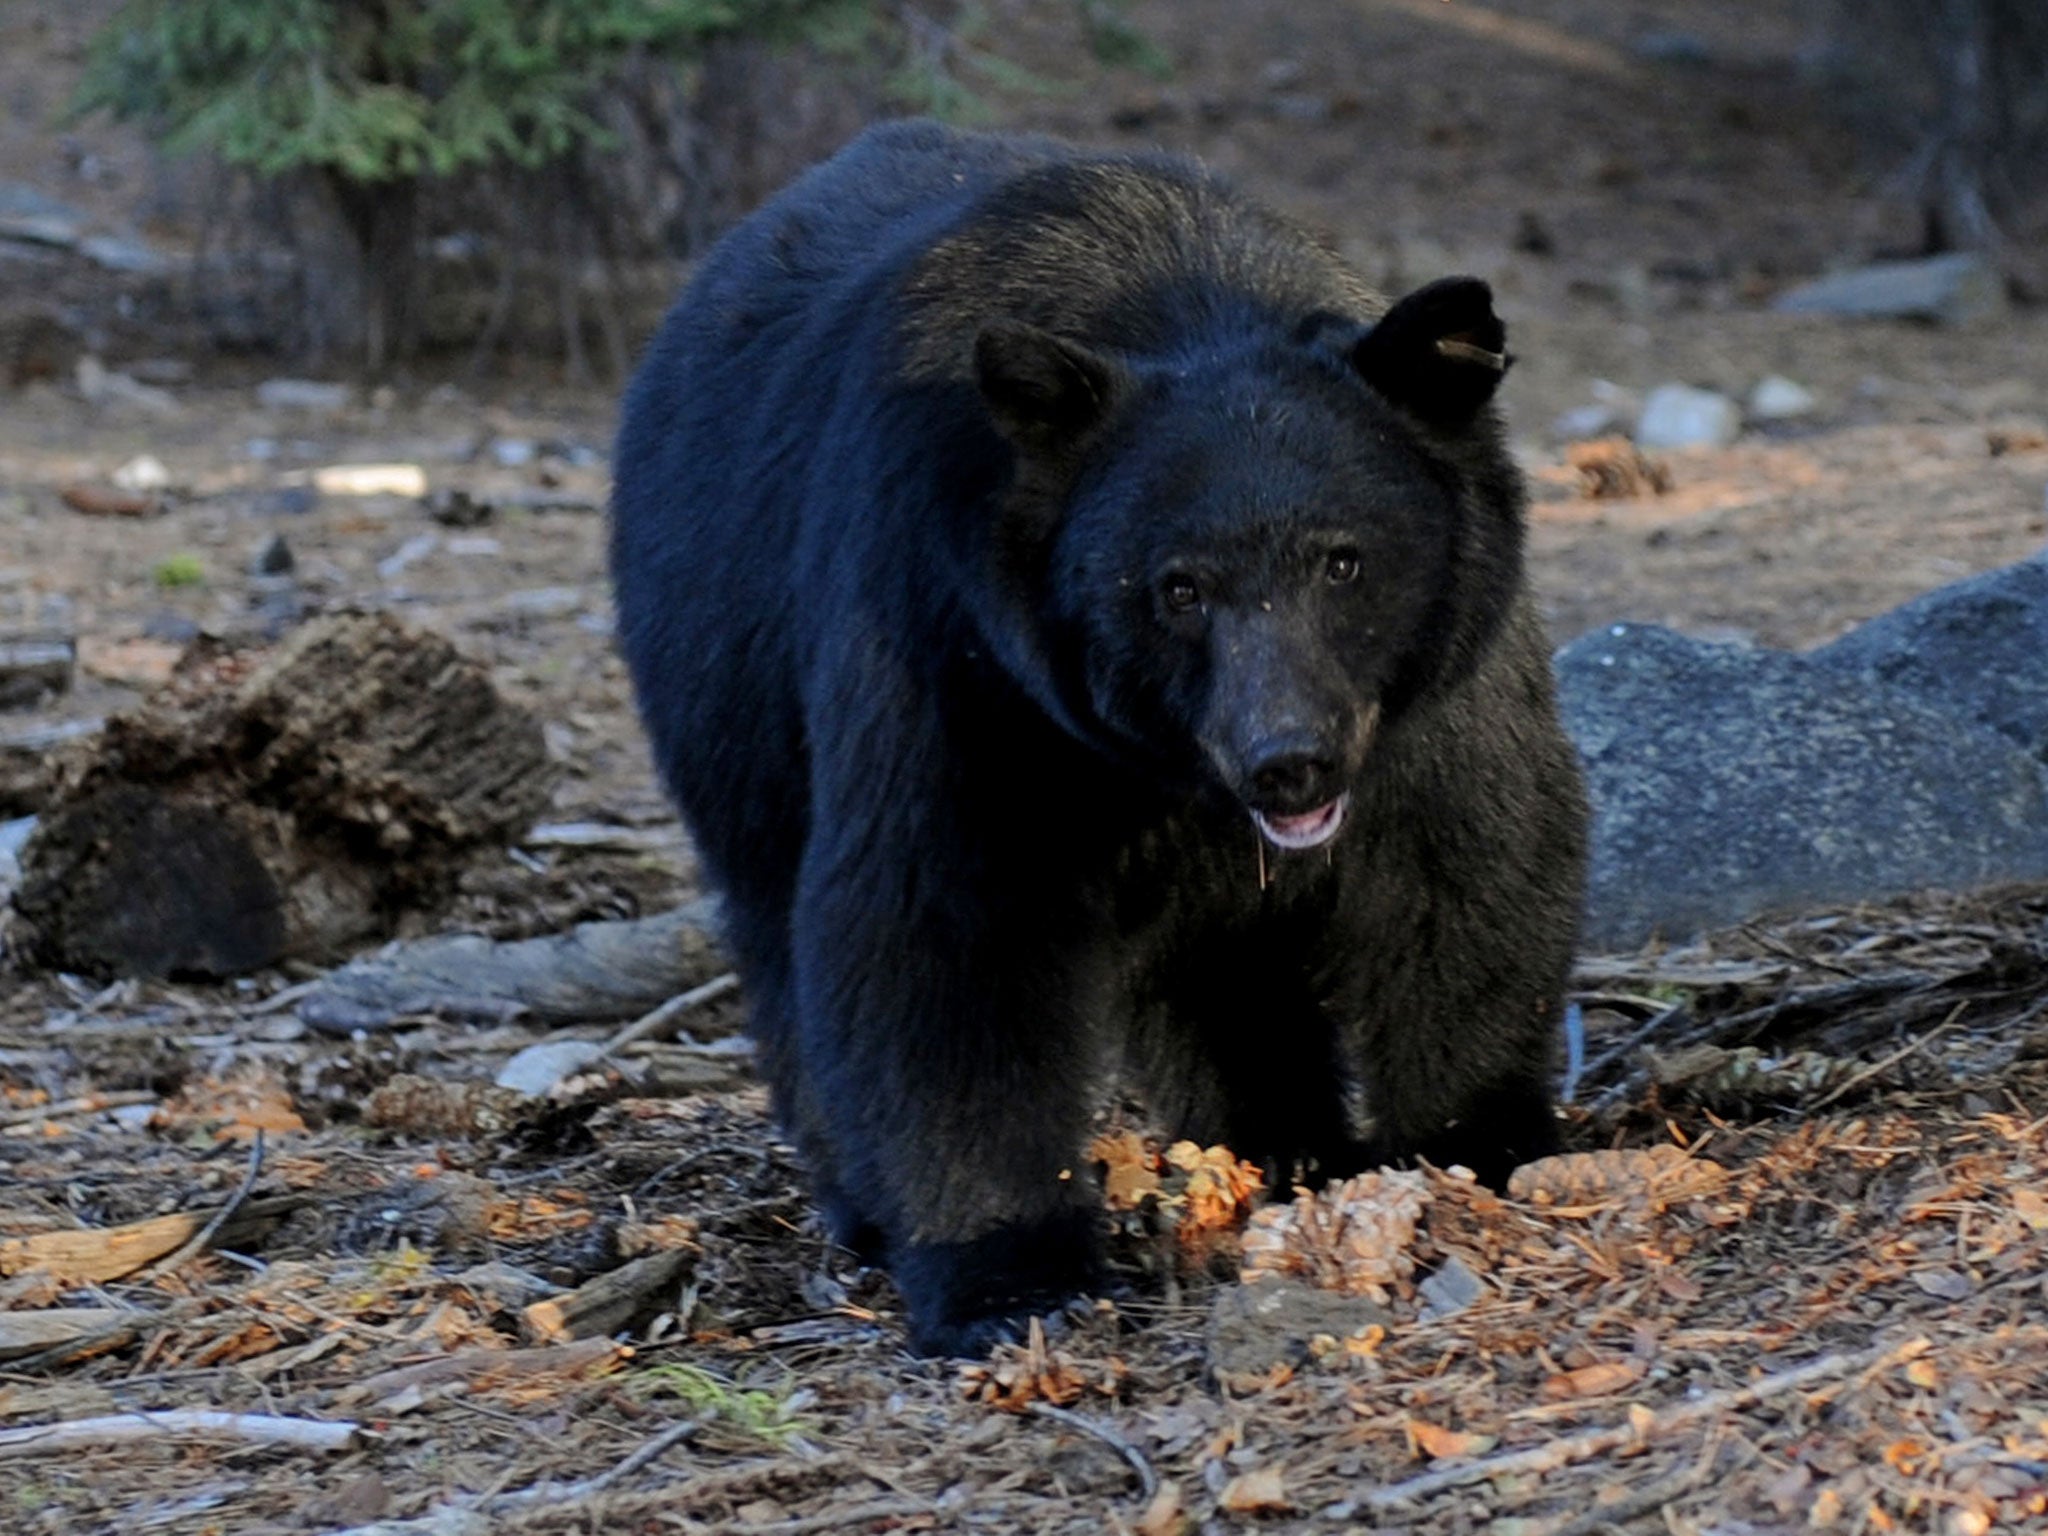 A black bear, similar to the creature which attacked a man in Minnesota